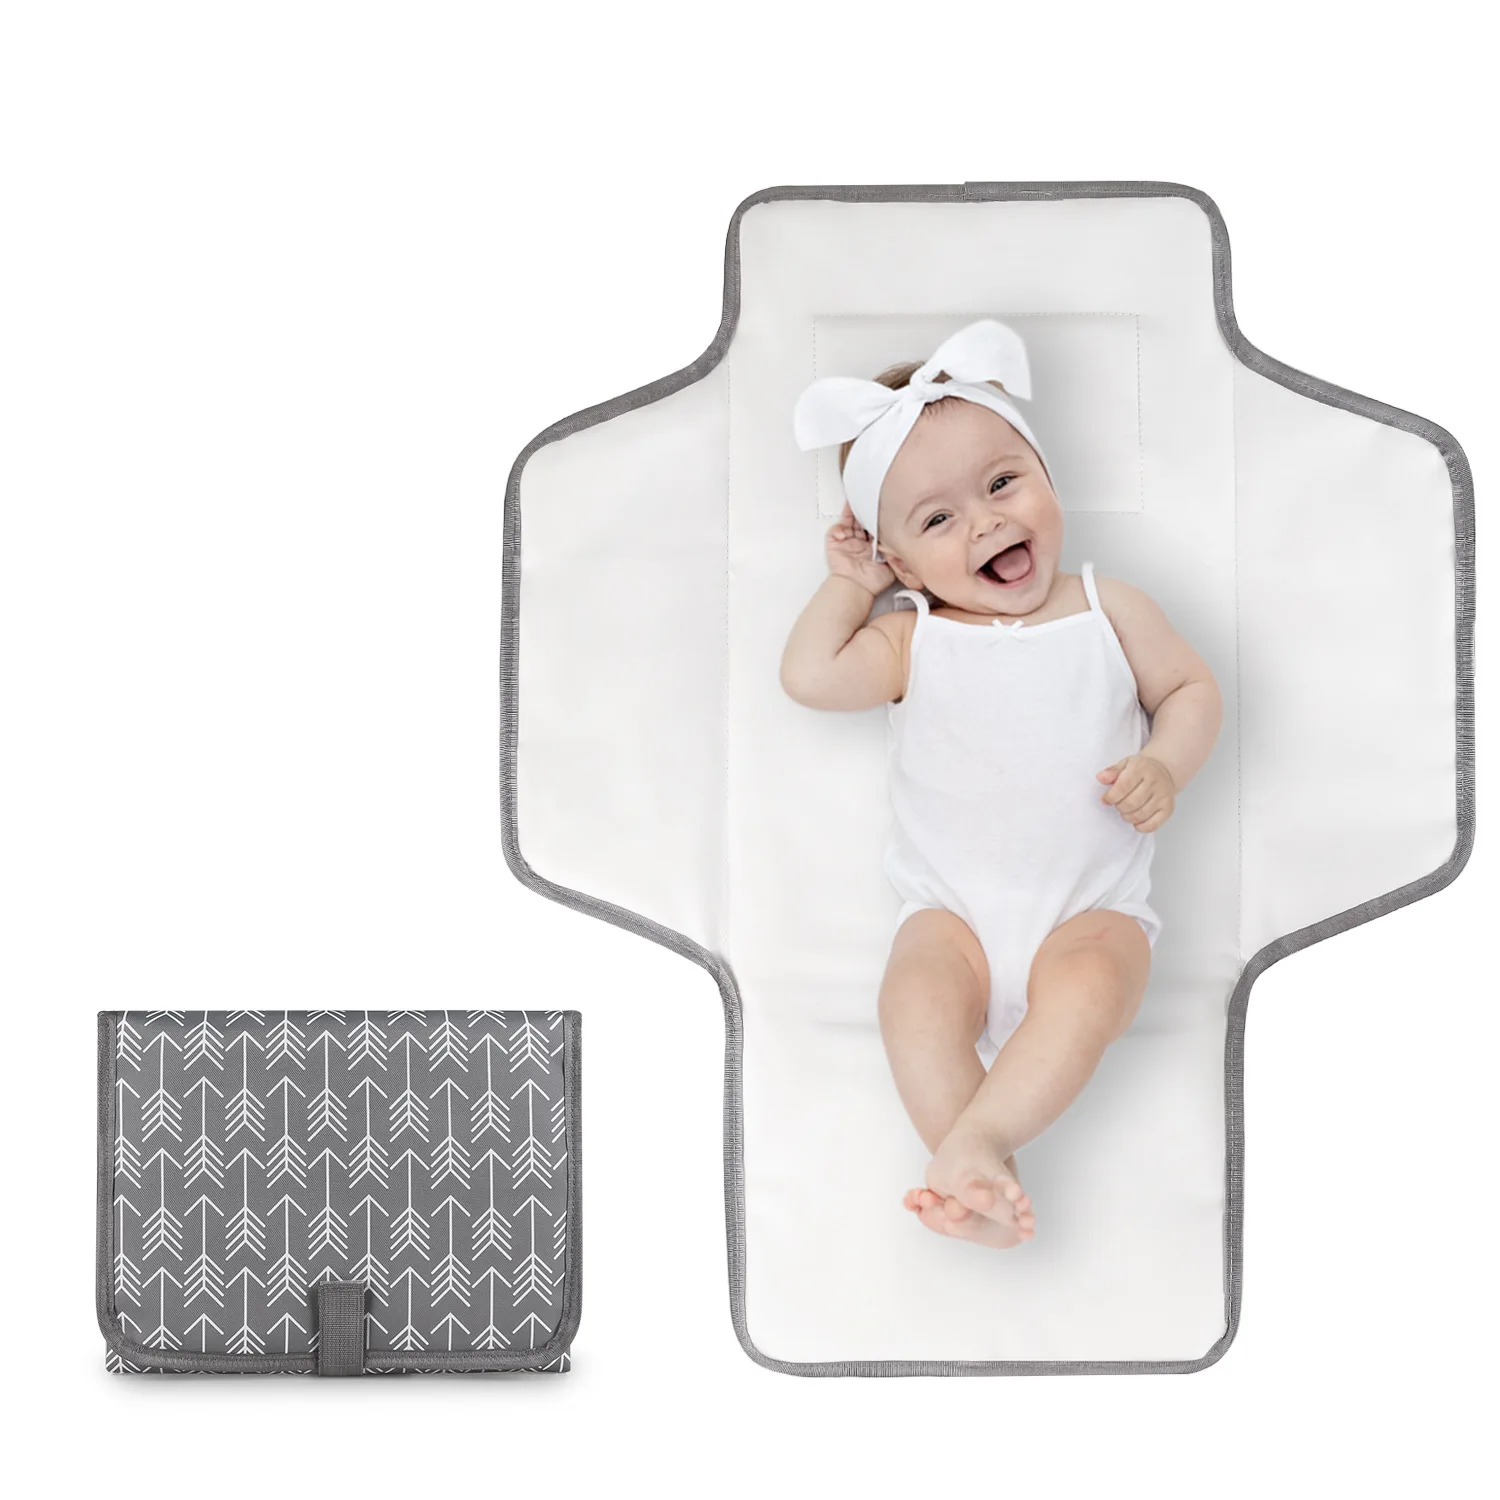 

Simple urinary pad, portable for mother and baby travel, changing diaper pads, foldable, easy to wipe, waterproof fabric